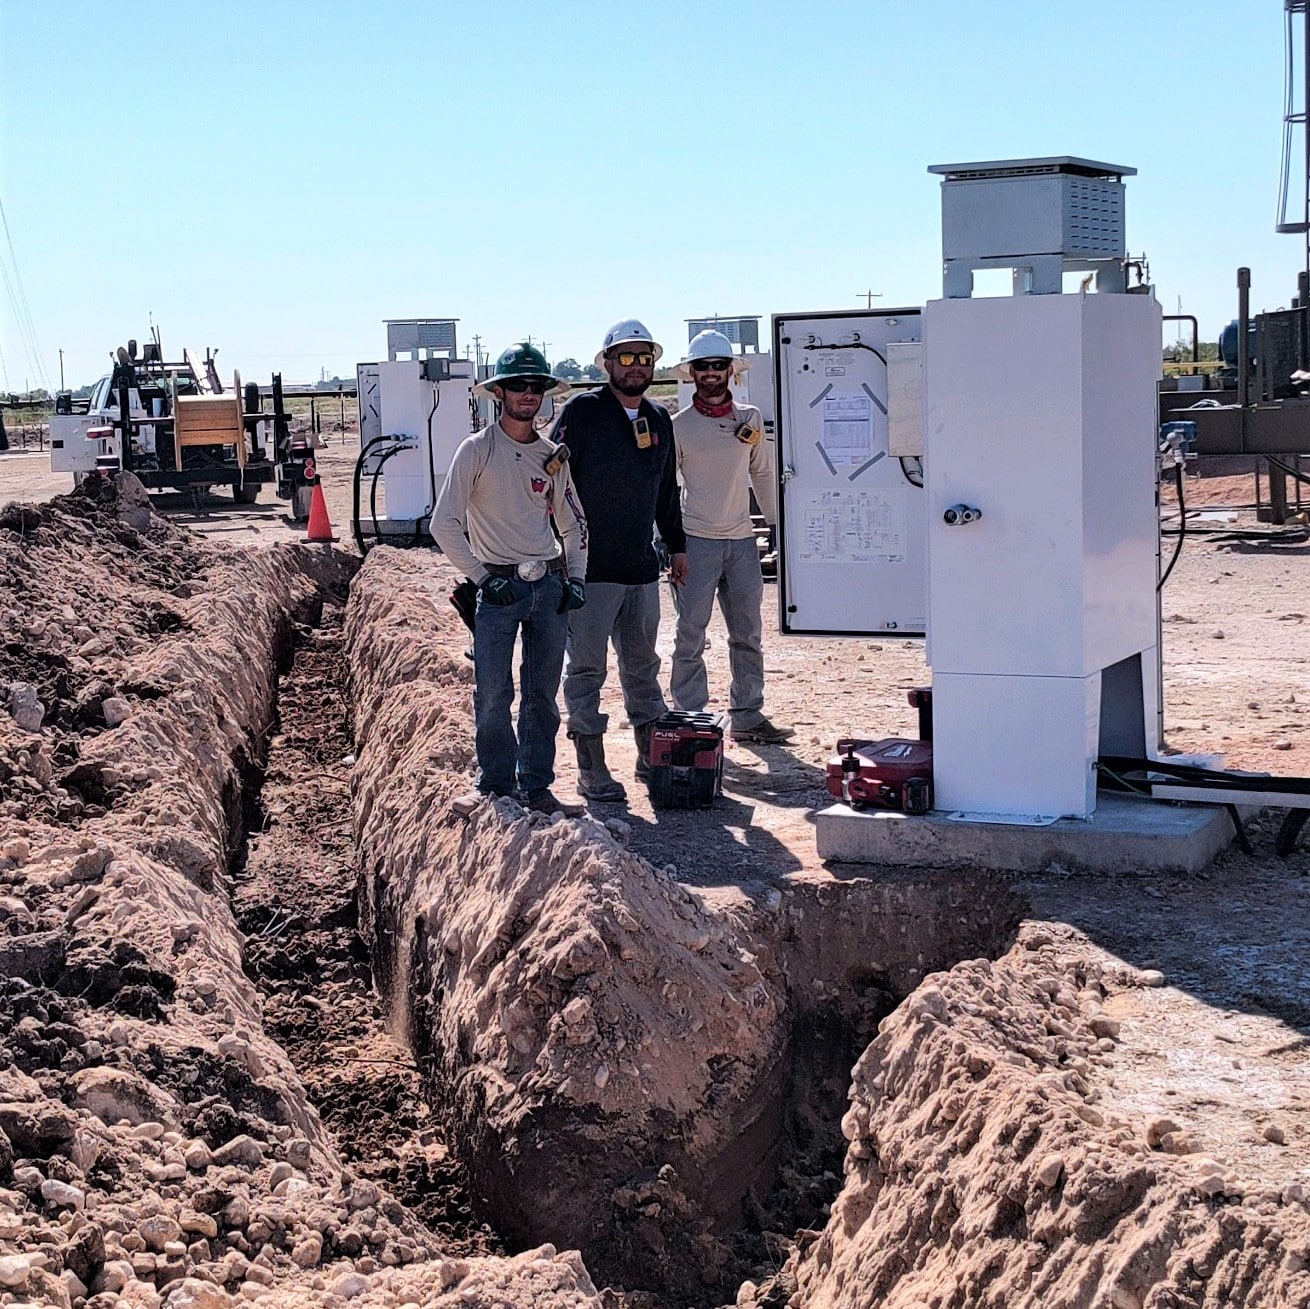 Men standing by electrical box next to wire pull at a job.